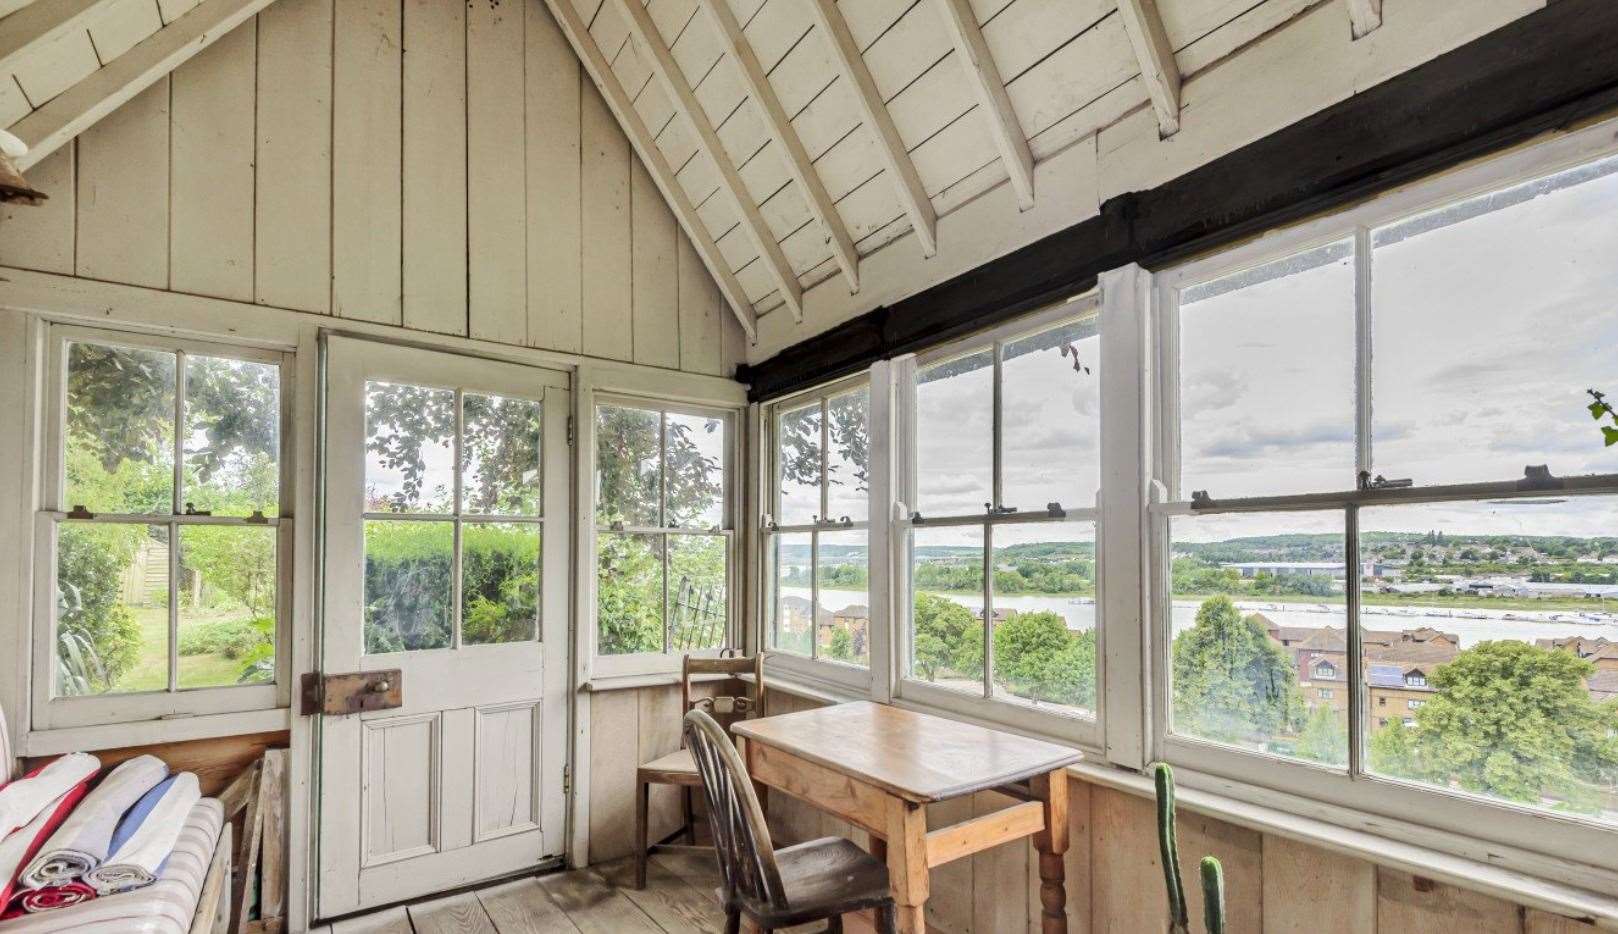 The summerhouse is a great place to sit and watch the world go by. Picture: Fine and Country